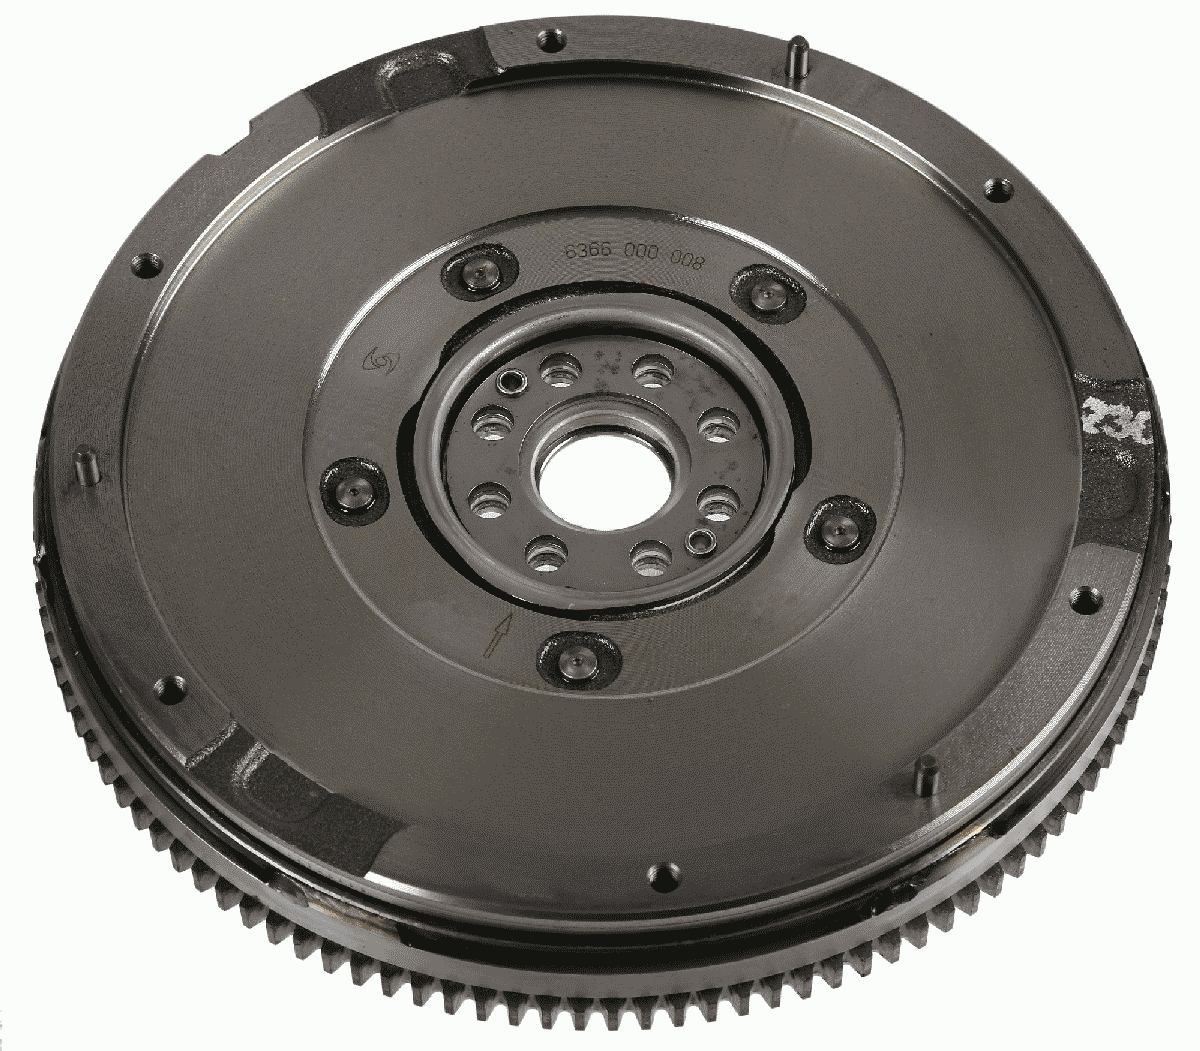 Ford Dual mass flywheel SACHS 6366 000 008 at a good price